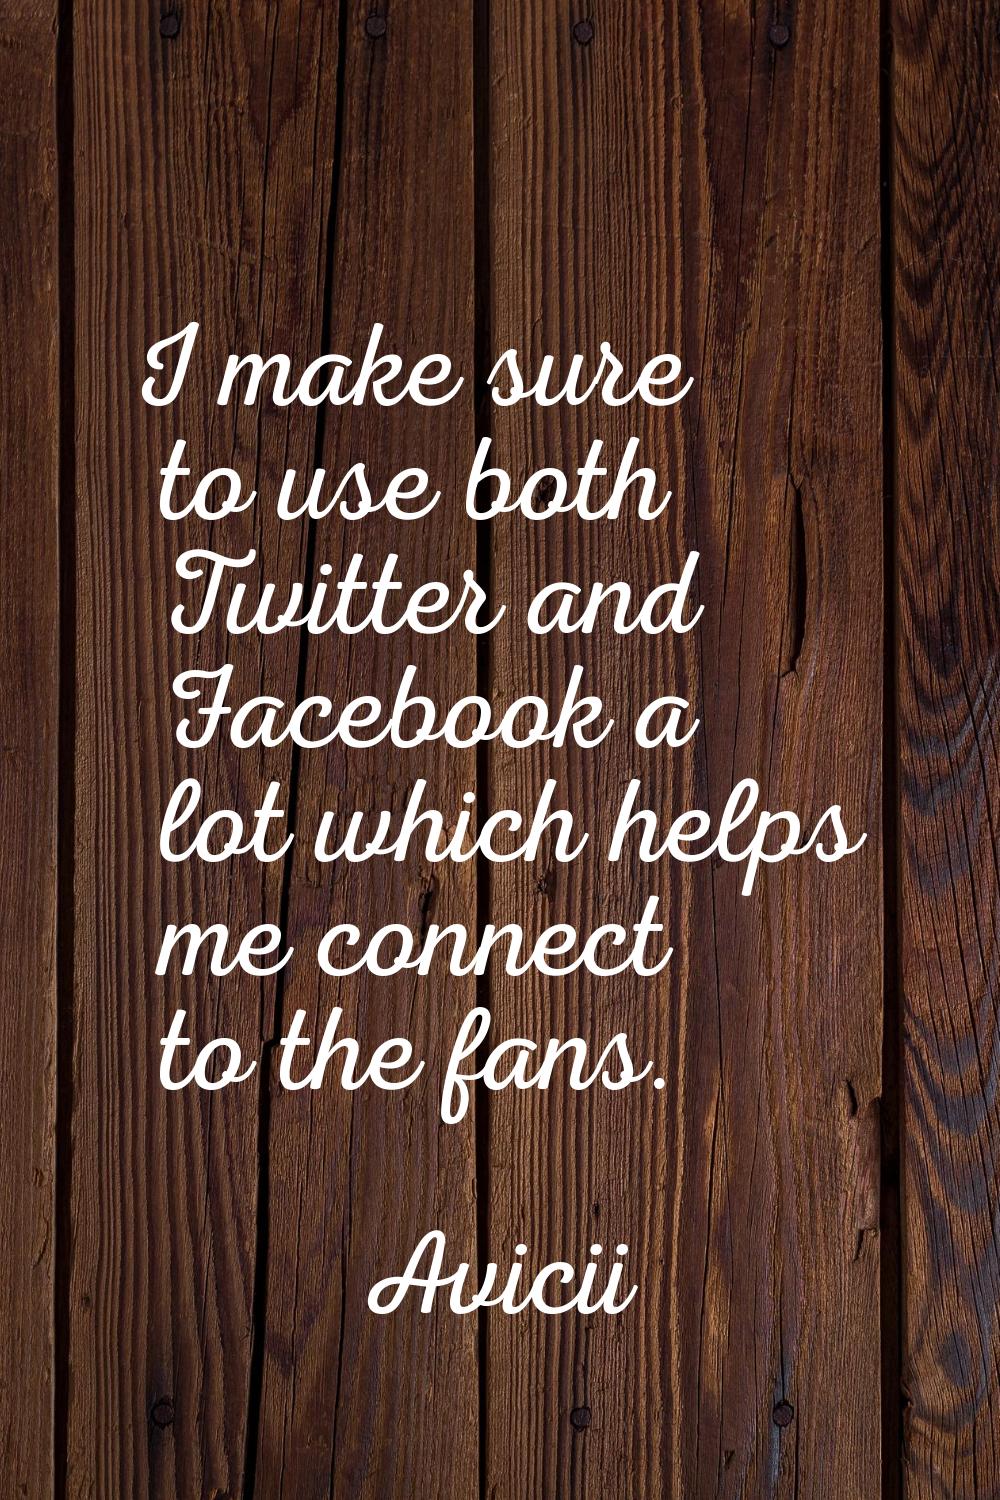 I make sure to use both Twitter and Facebook a lot which helps me connect to the fans.